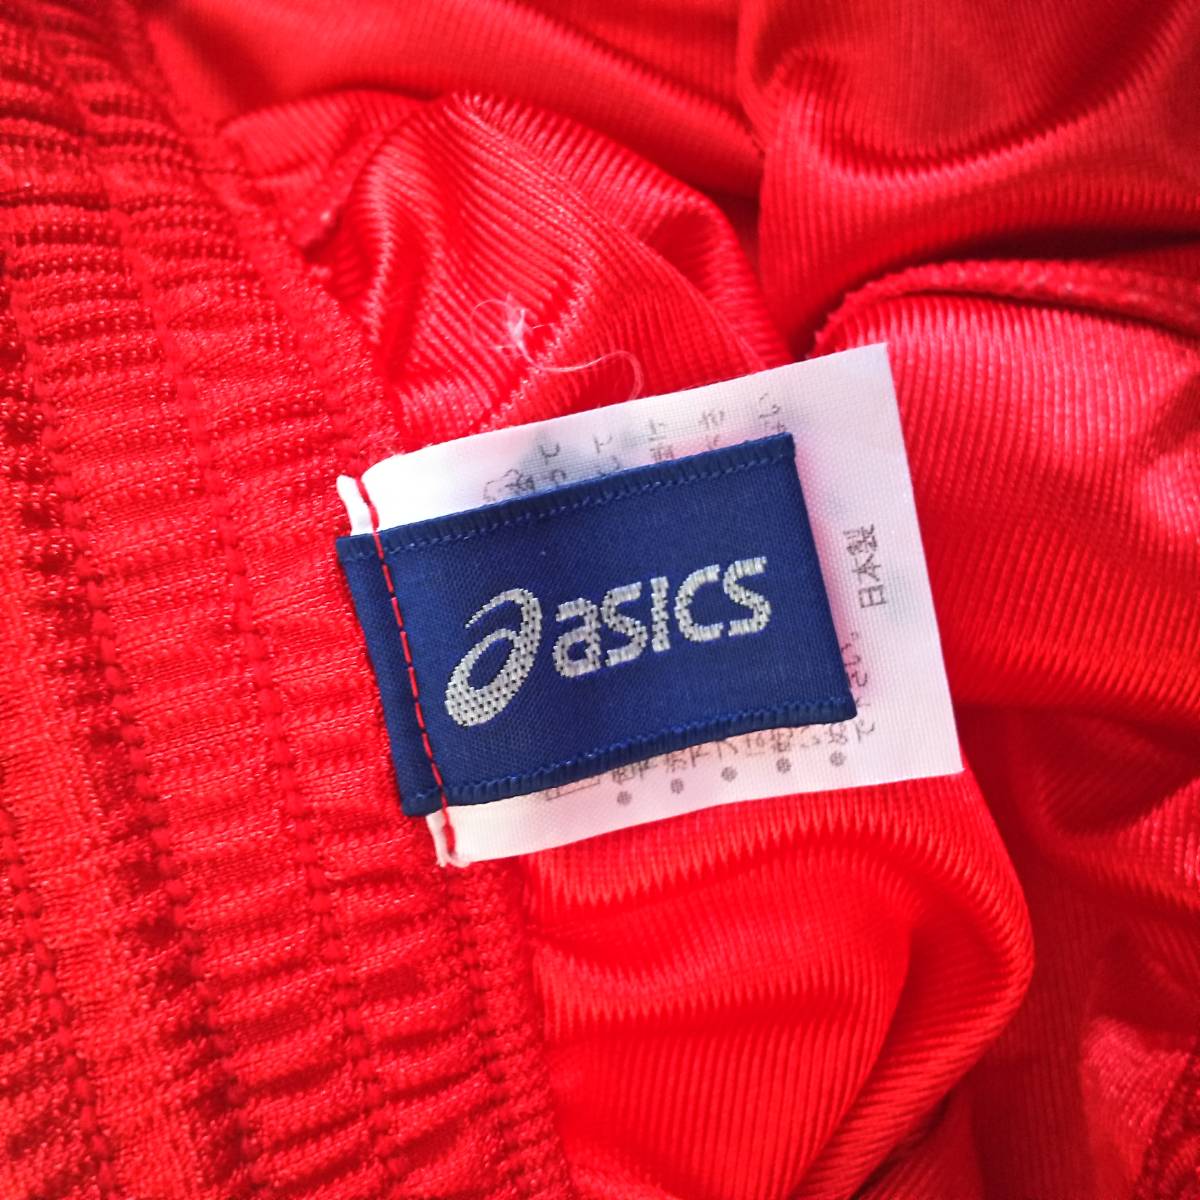 * Asics asics made in Japan 150 size shorts short pants red XS3610*